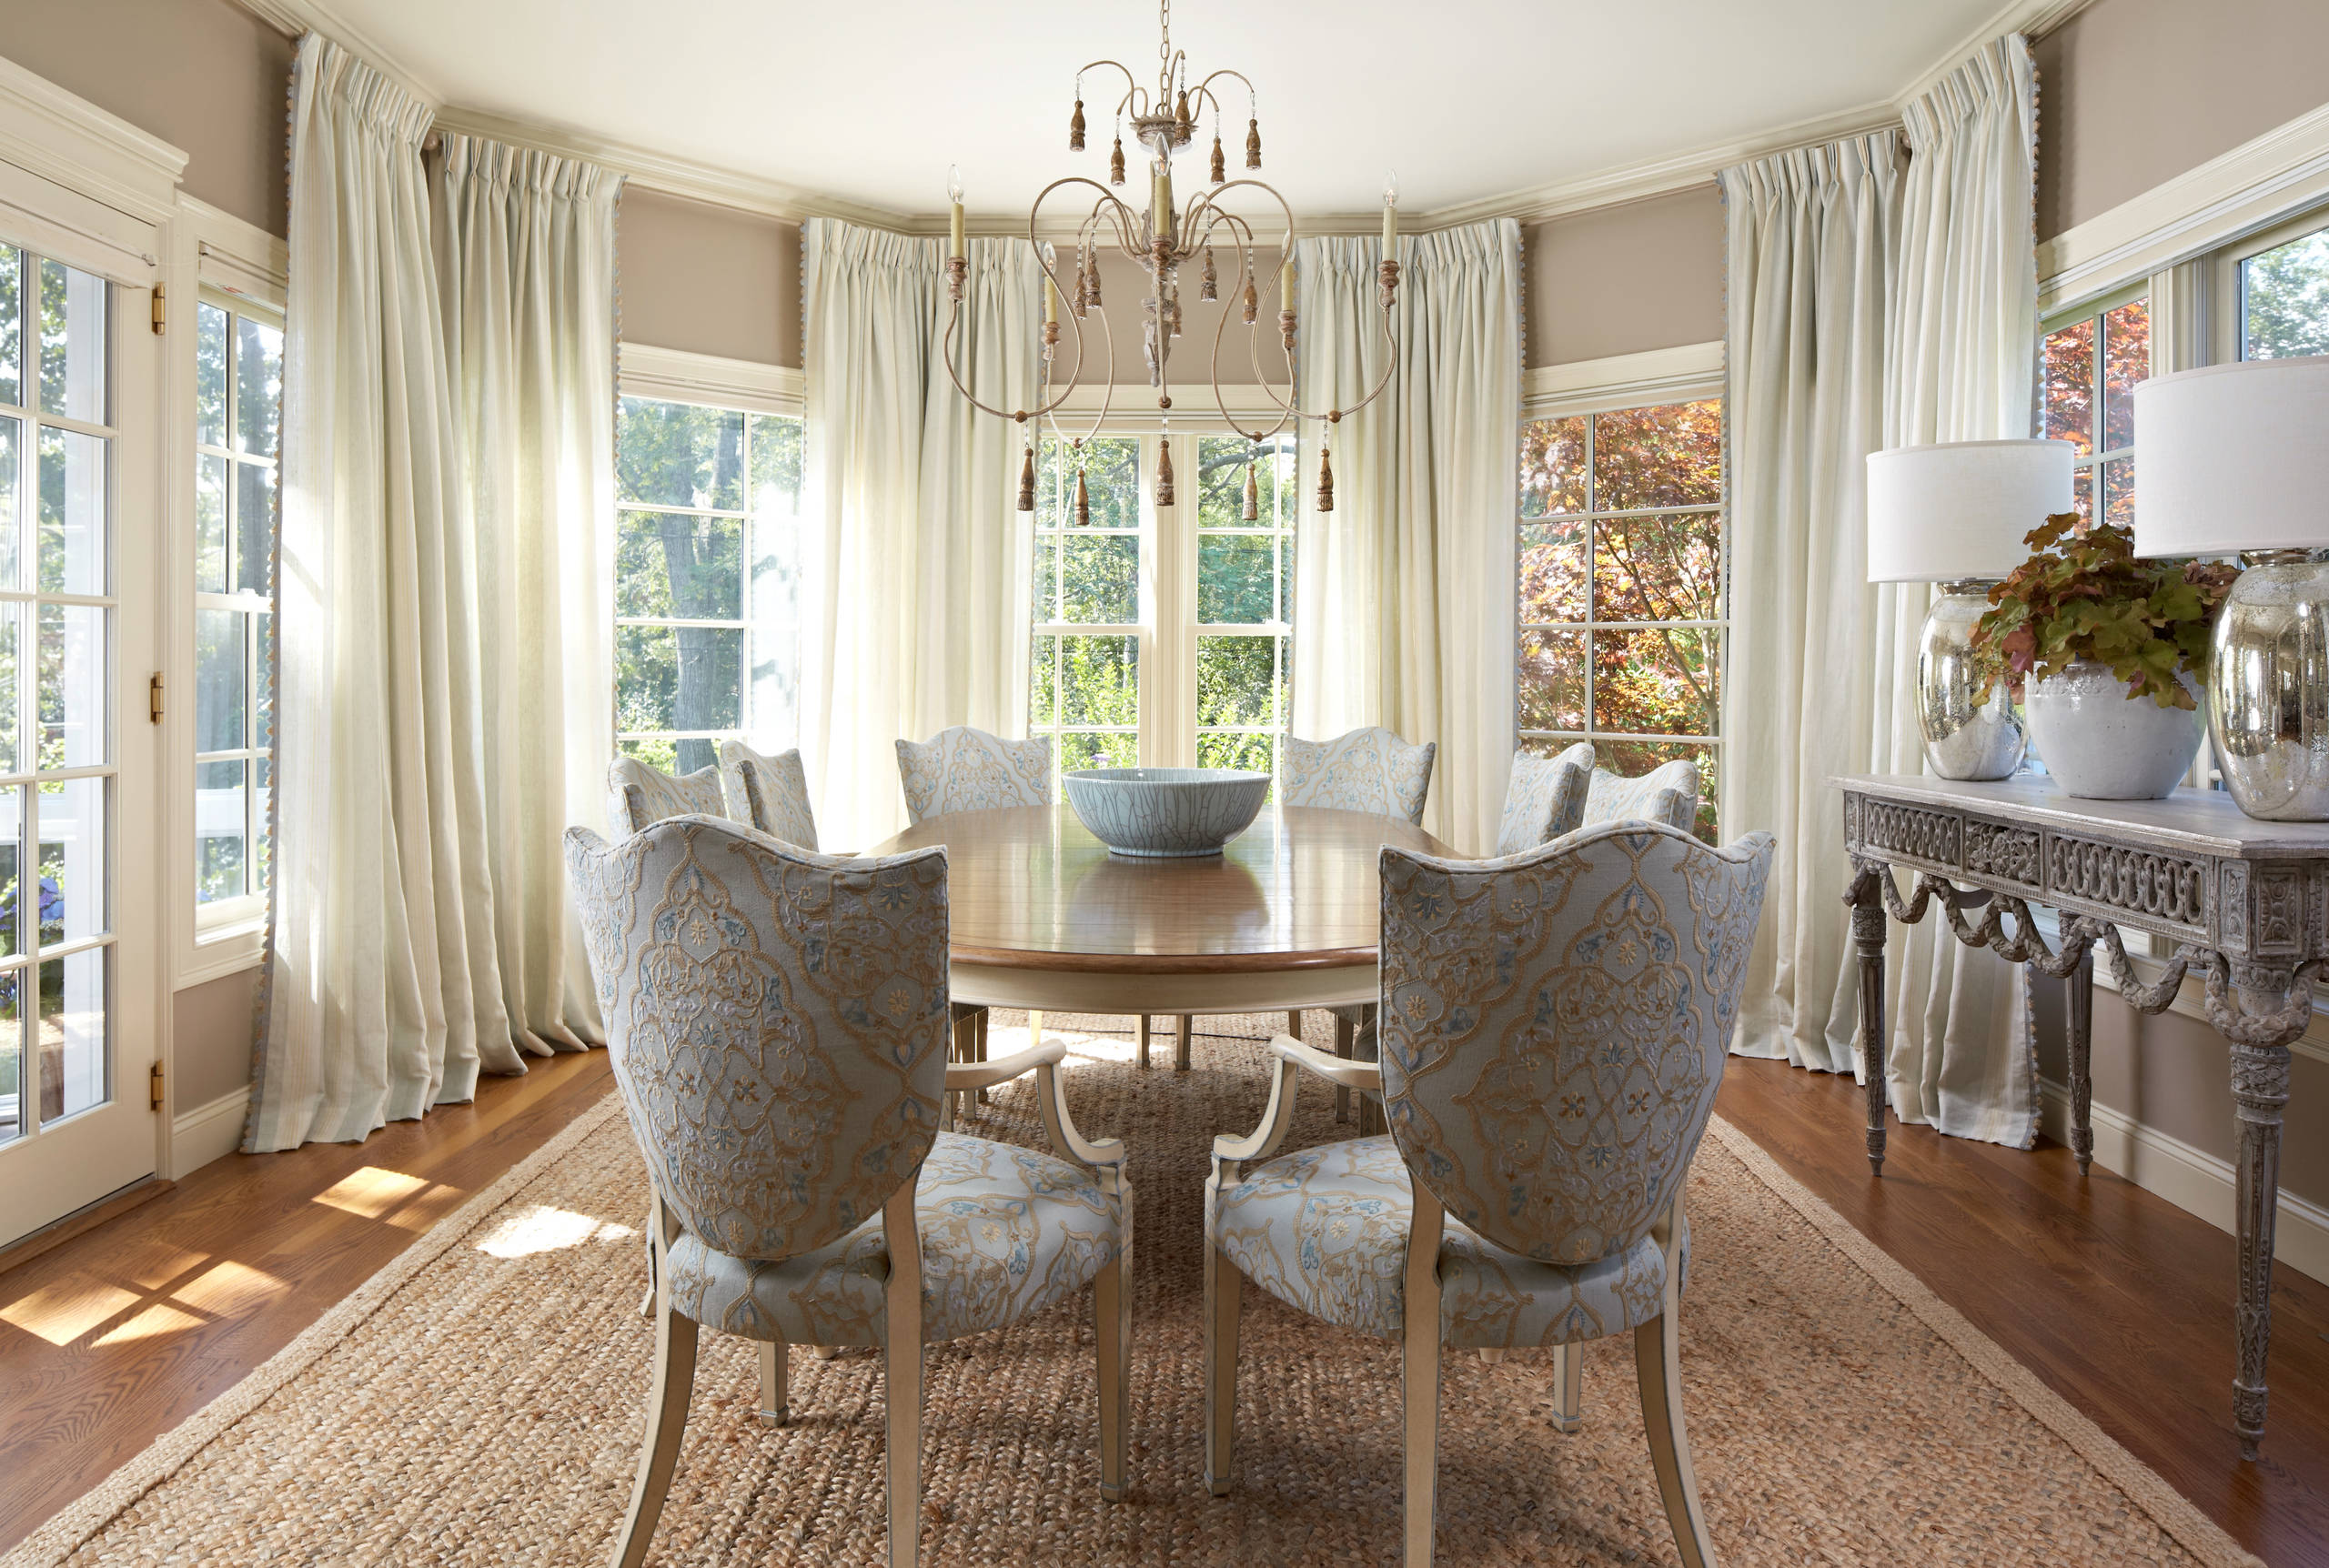 75 French Country Dining Room Ideas You'll Love - April, 2023 | Houzz